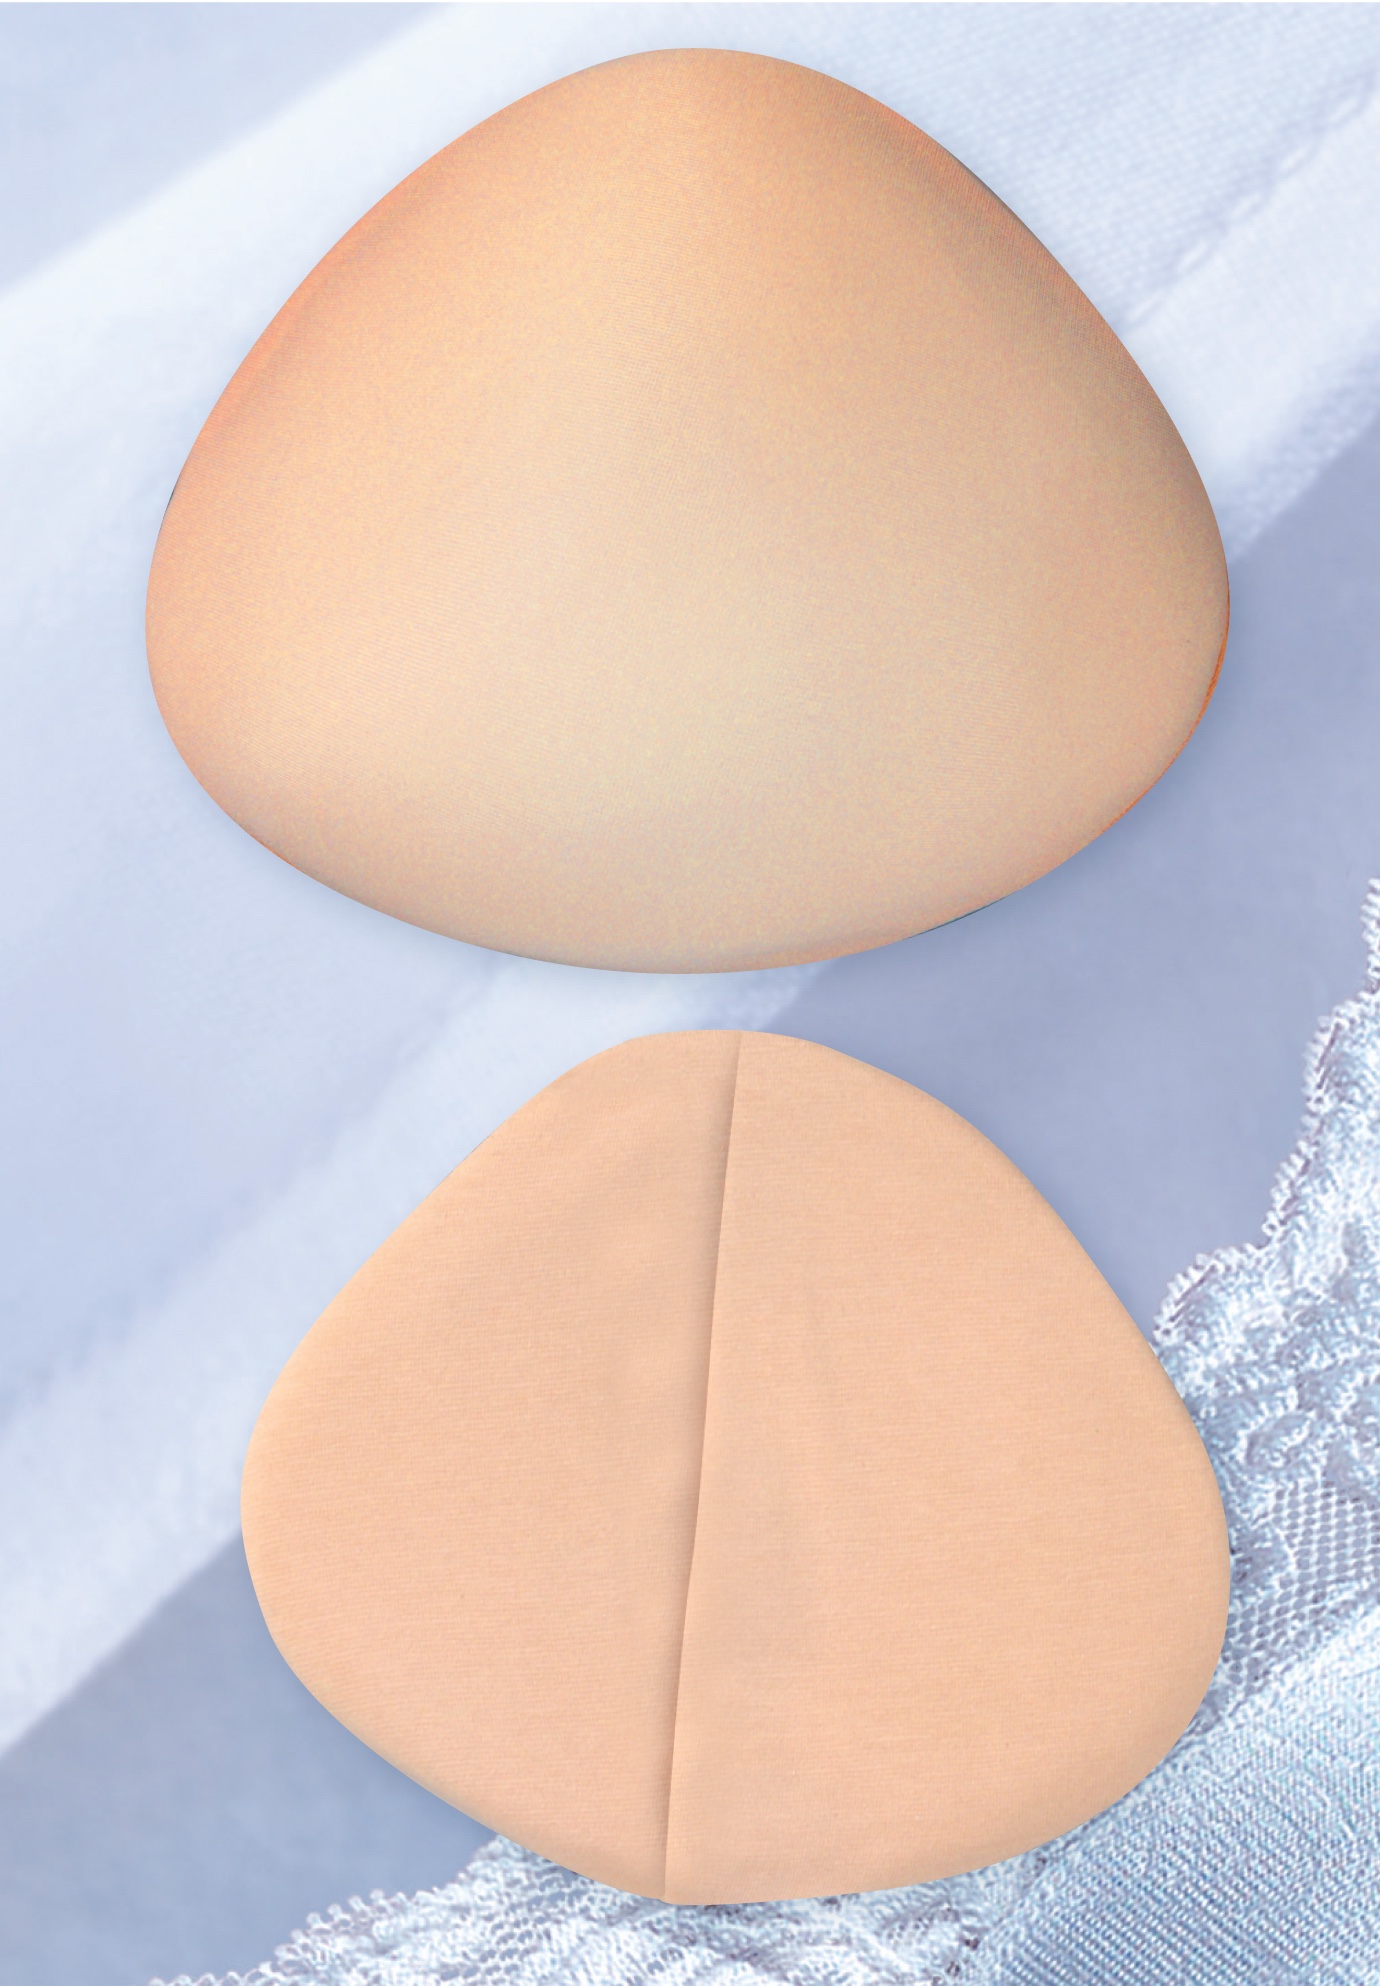 How To Make Breast Forms